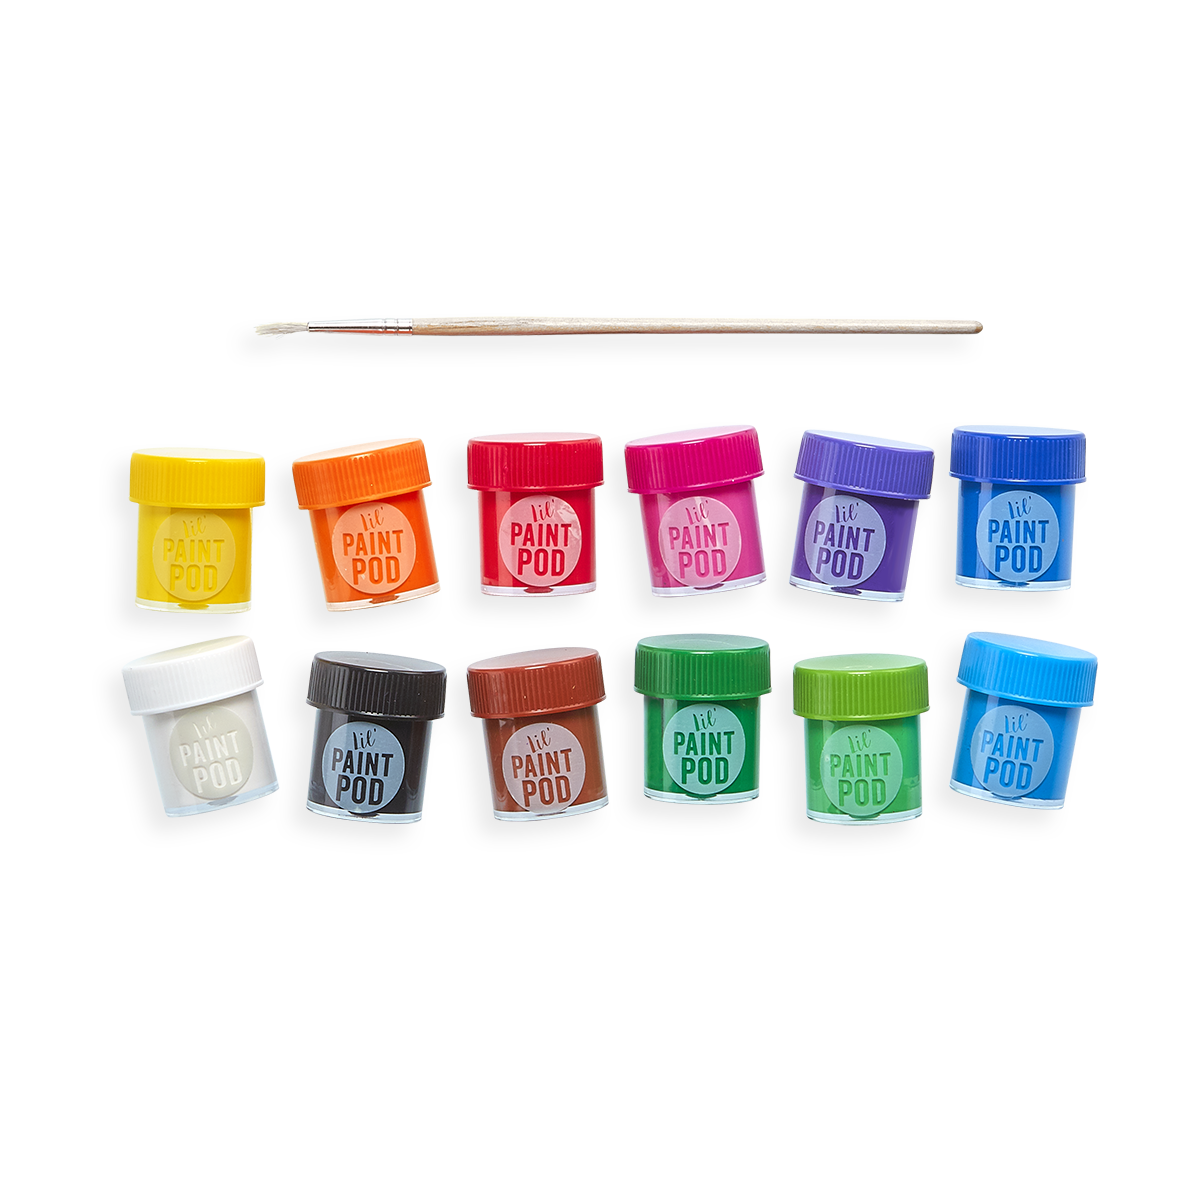 OOLY lil' Poster Paint Pods Paint Pods